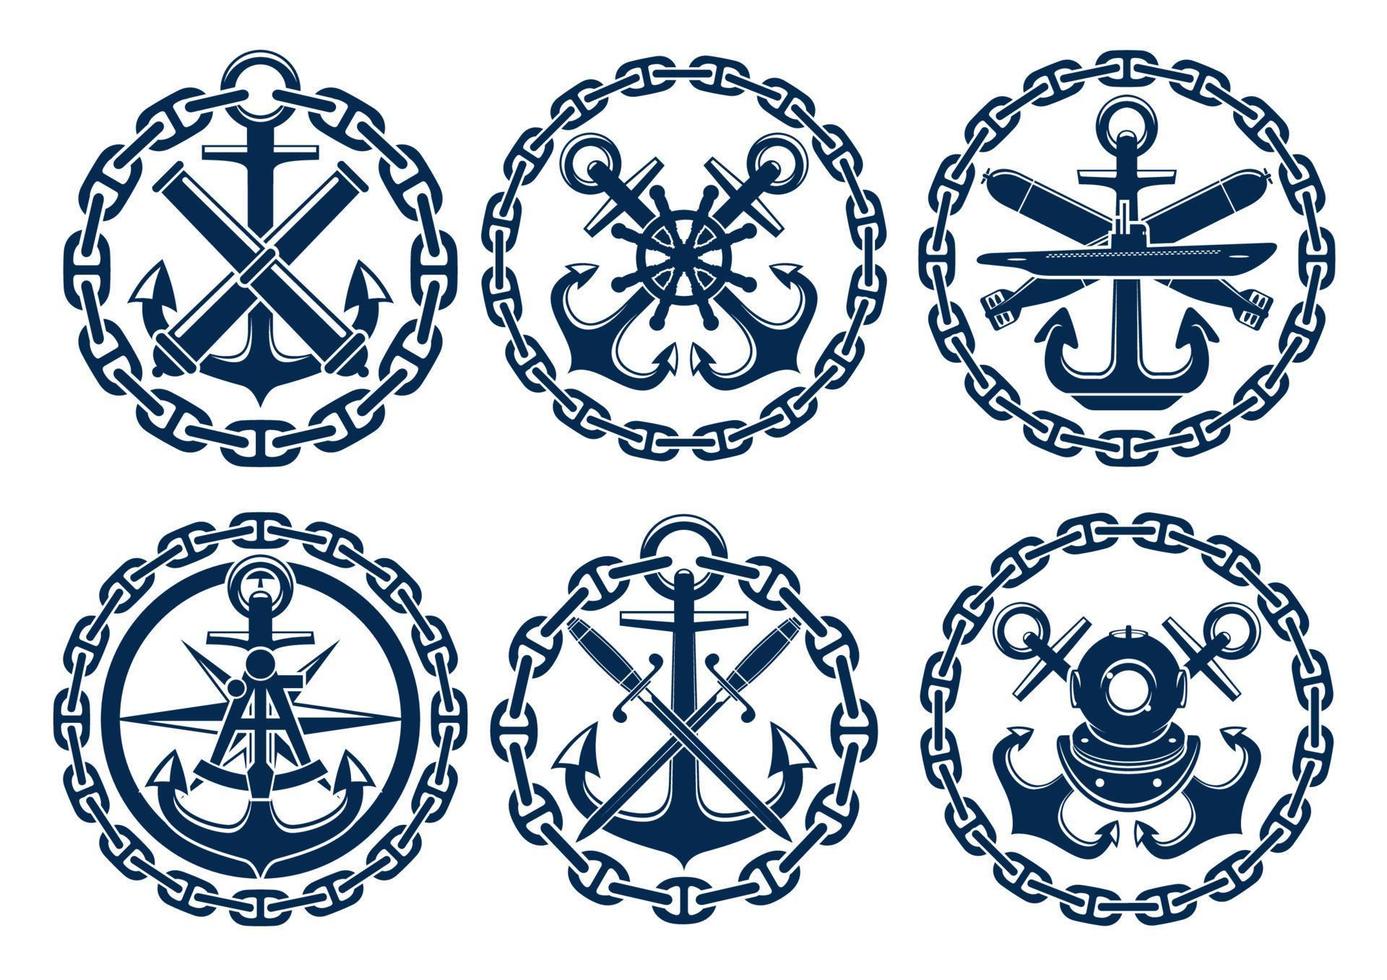 Marine and nautical emblems, icons vector